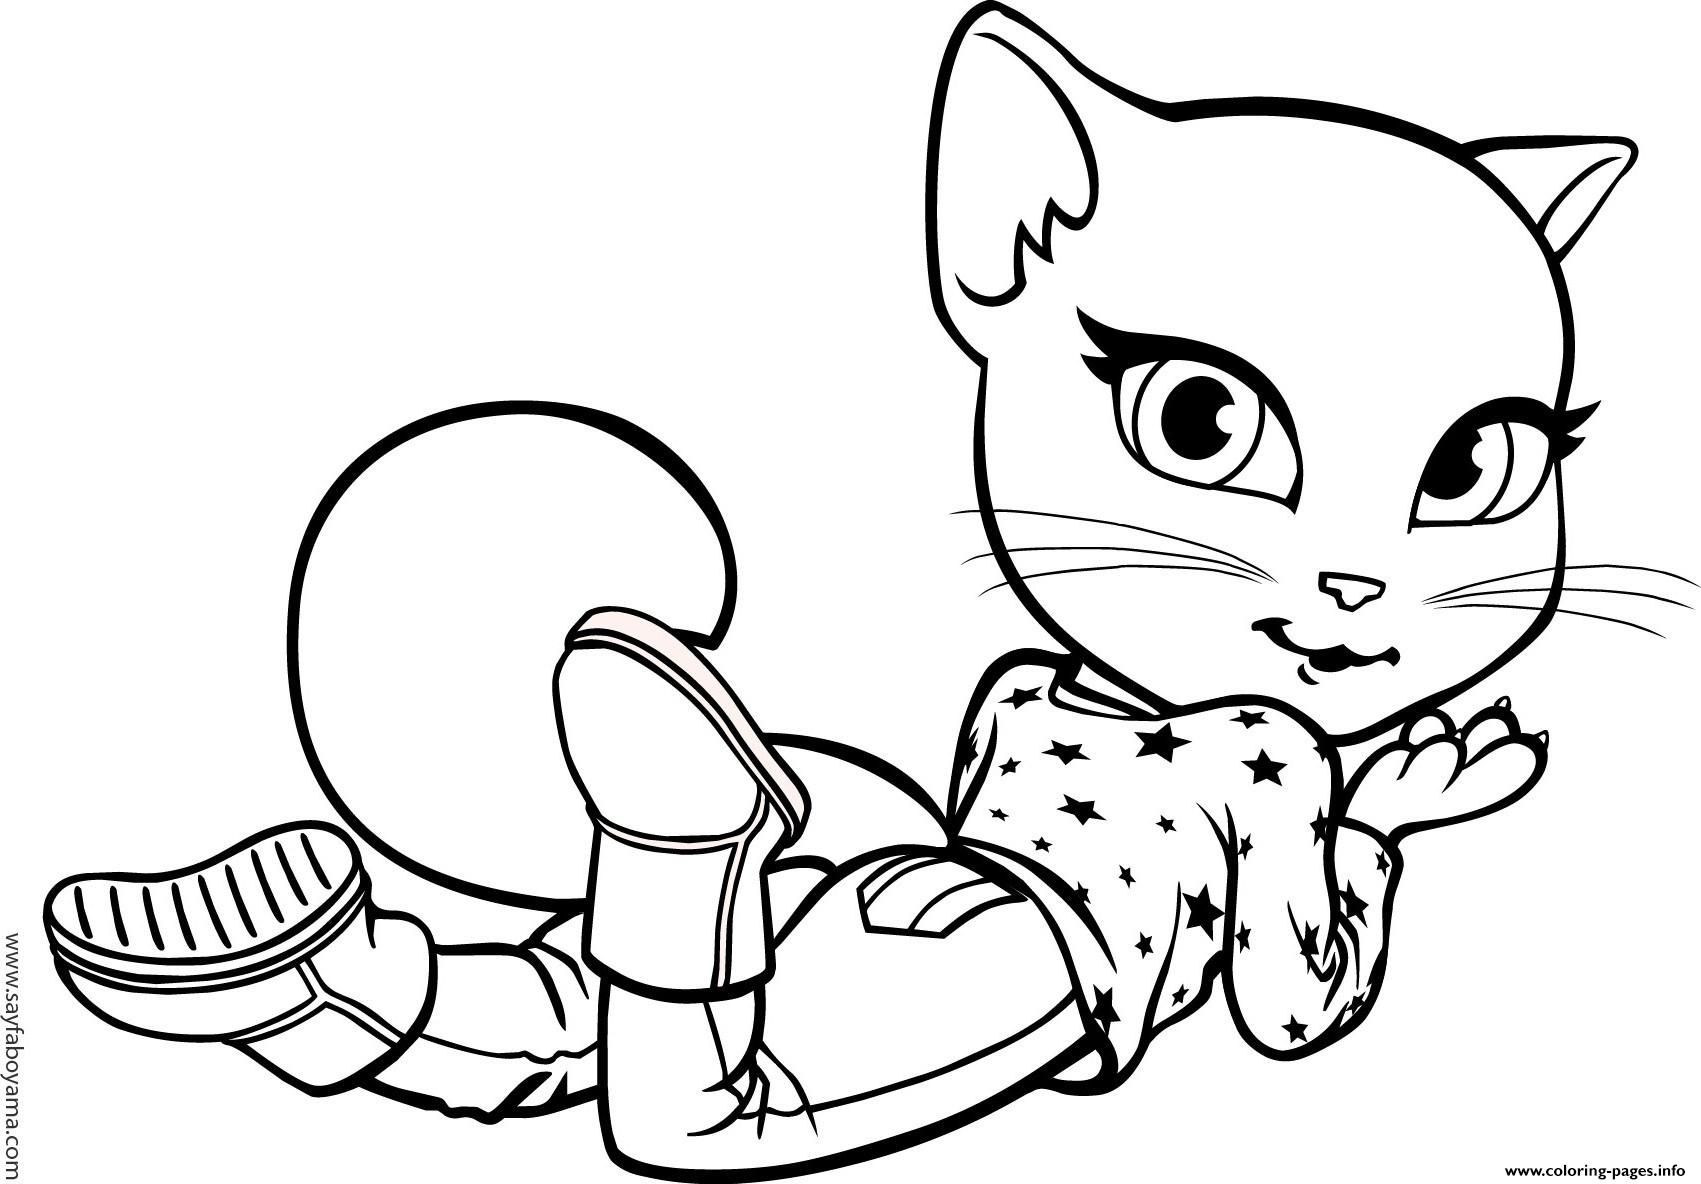 Angela Coloring Pages   Coloring Home